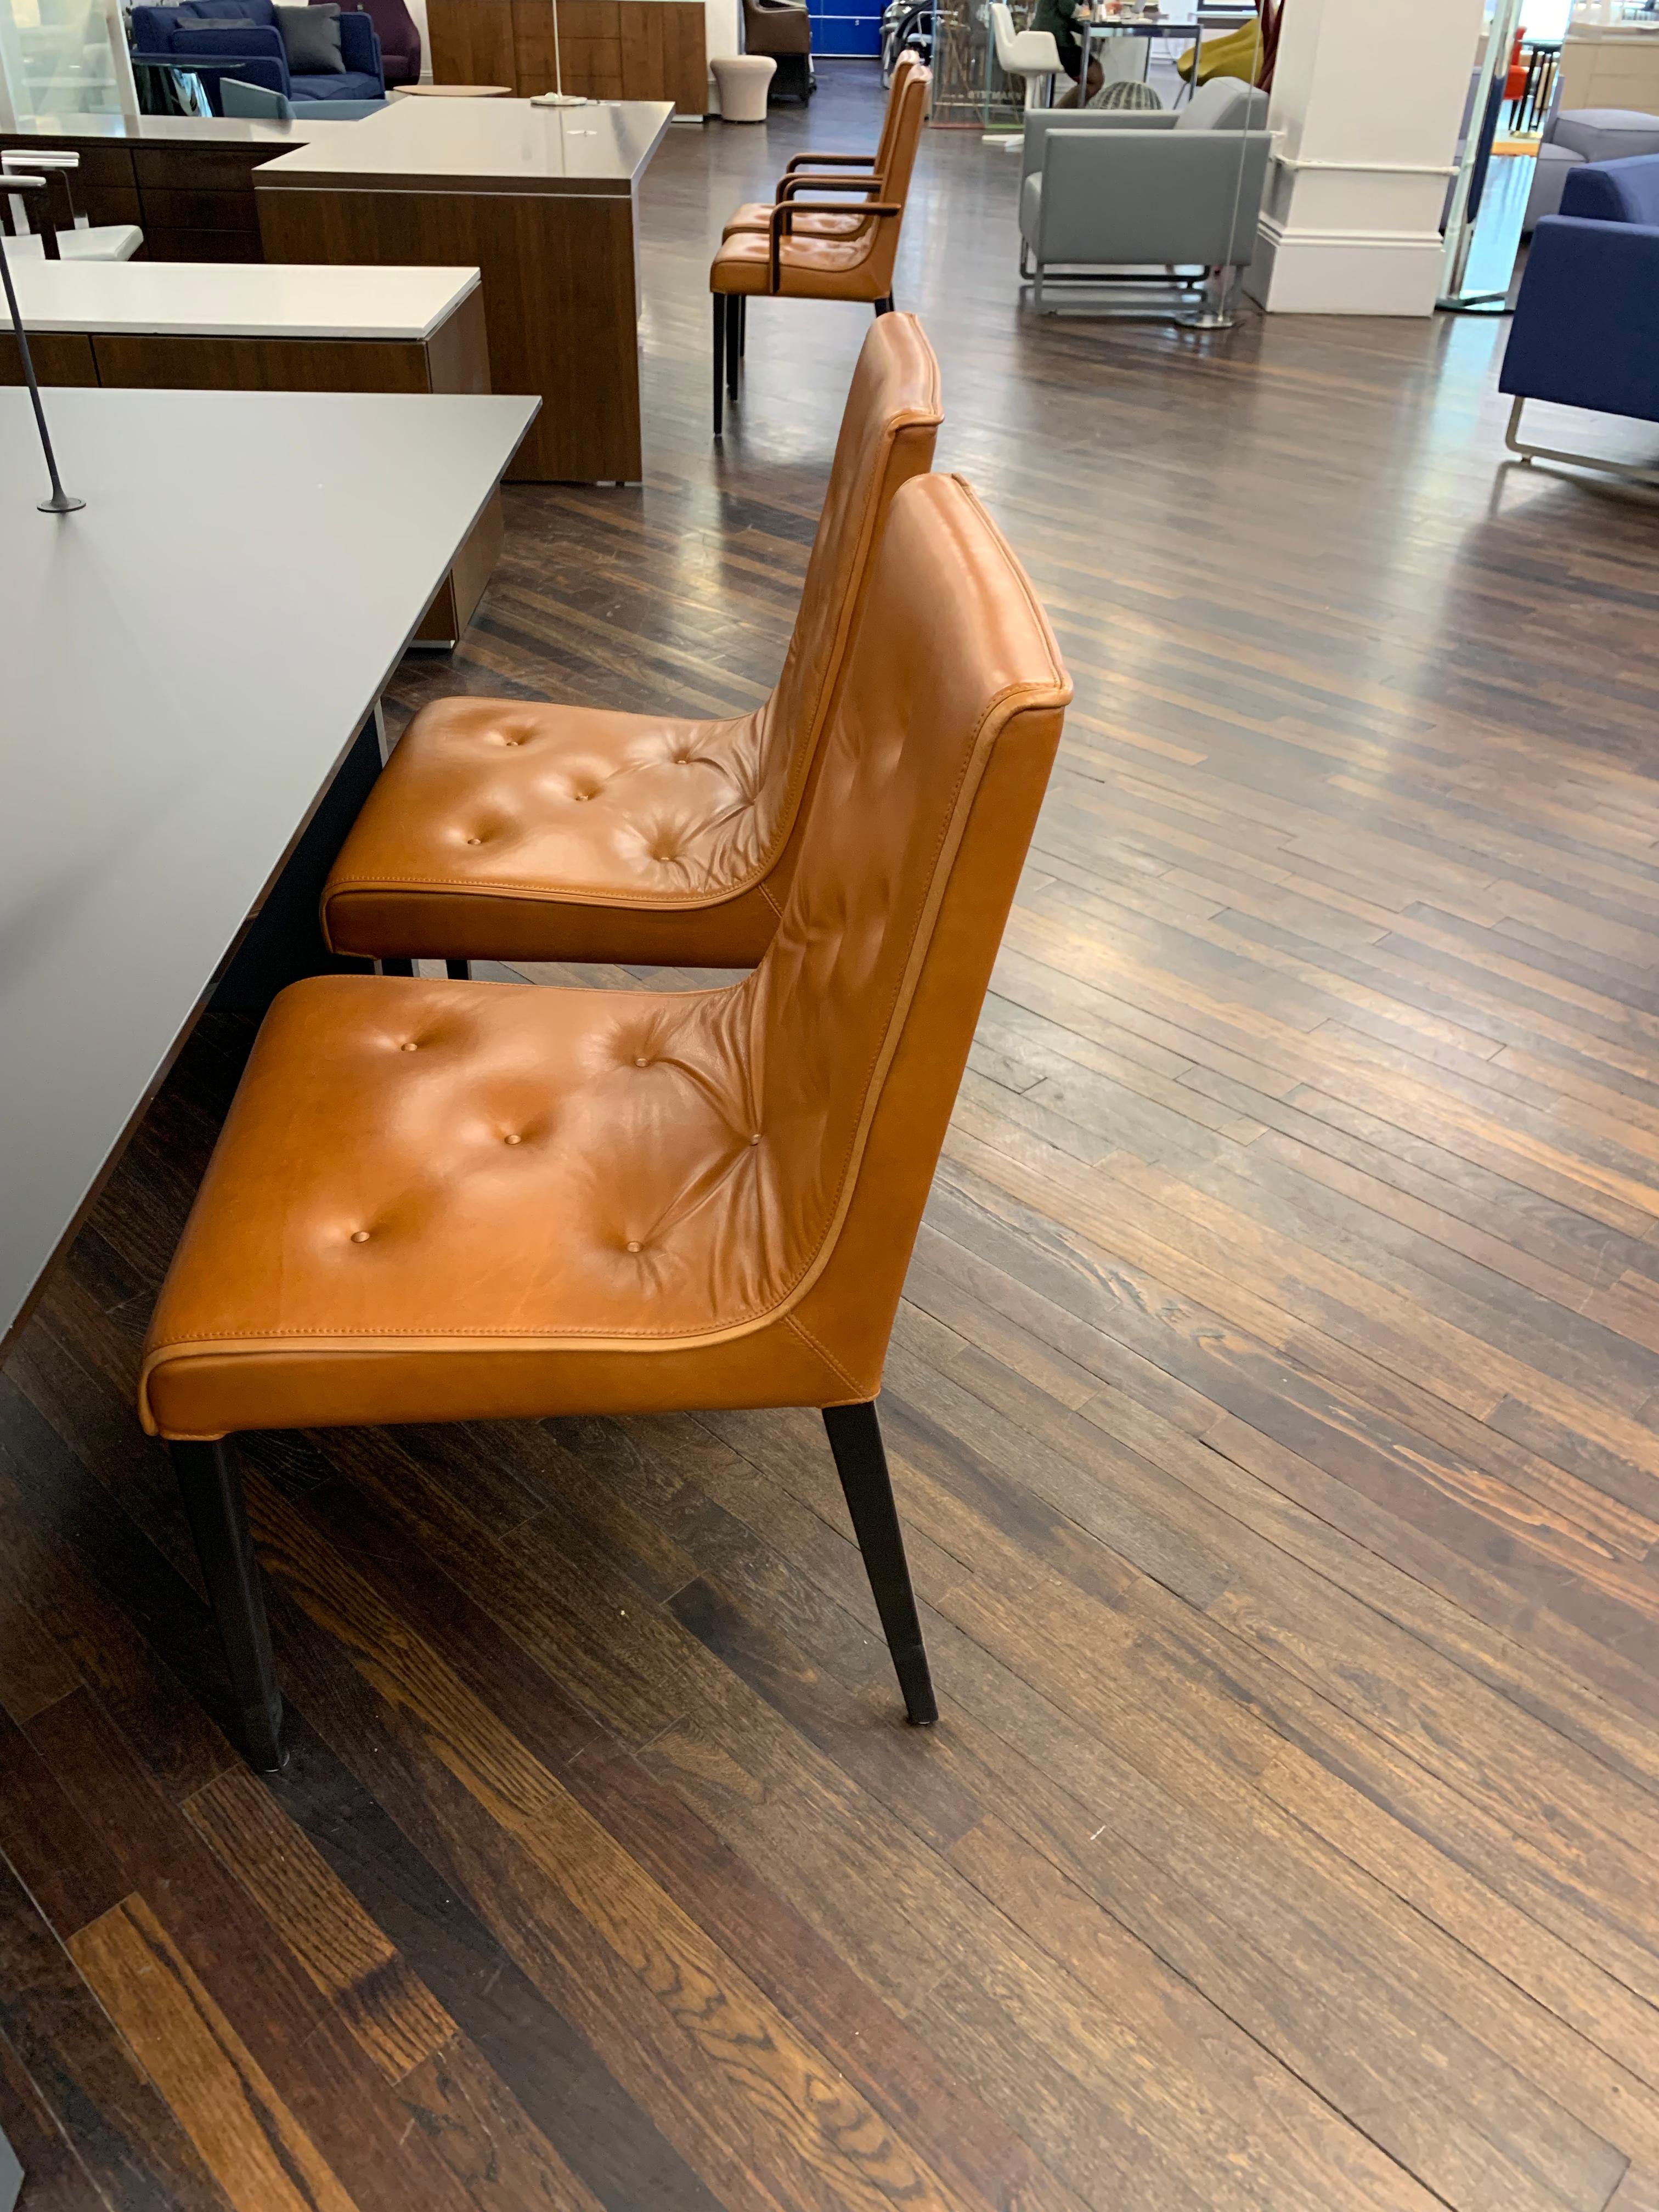 Upholstered in natural leather brandy
Base/ armrests: Bleech black stained 
Original price: $ 15,230
Leslie’s signature design element is a soft, upholstered mat that appears to be laid loosely on the furniture, though in reality it is